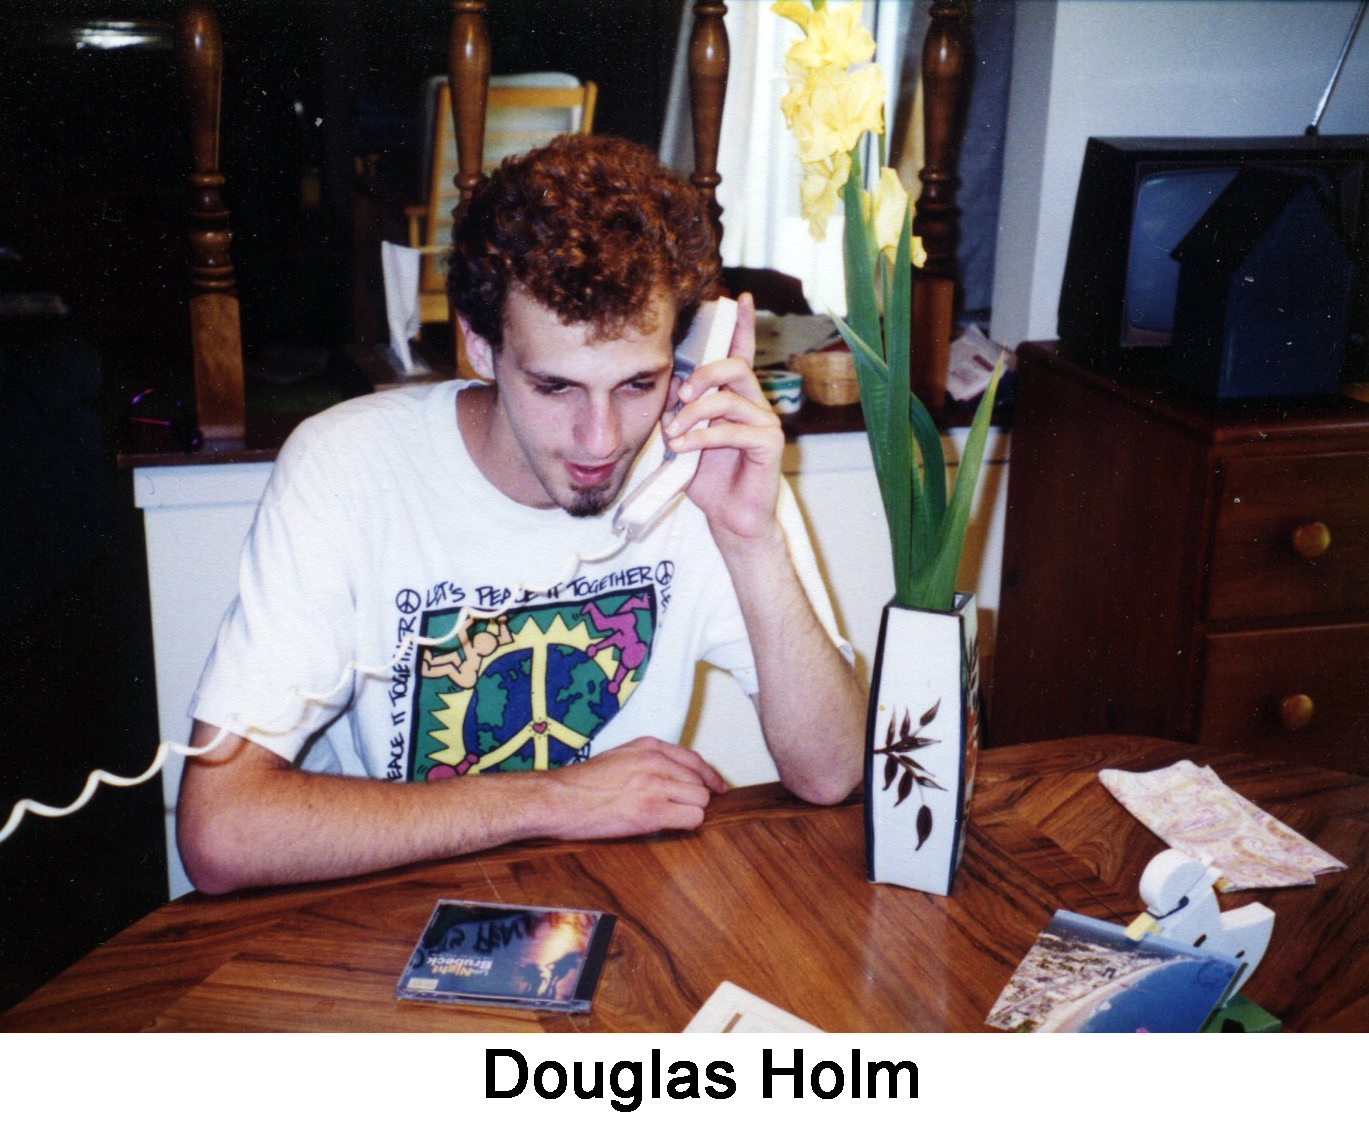 Doug Holm is sitting at the dinner table with phone in hand